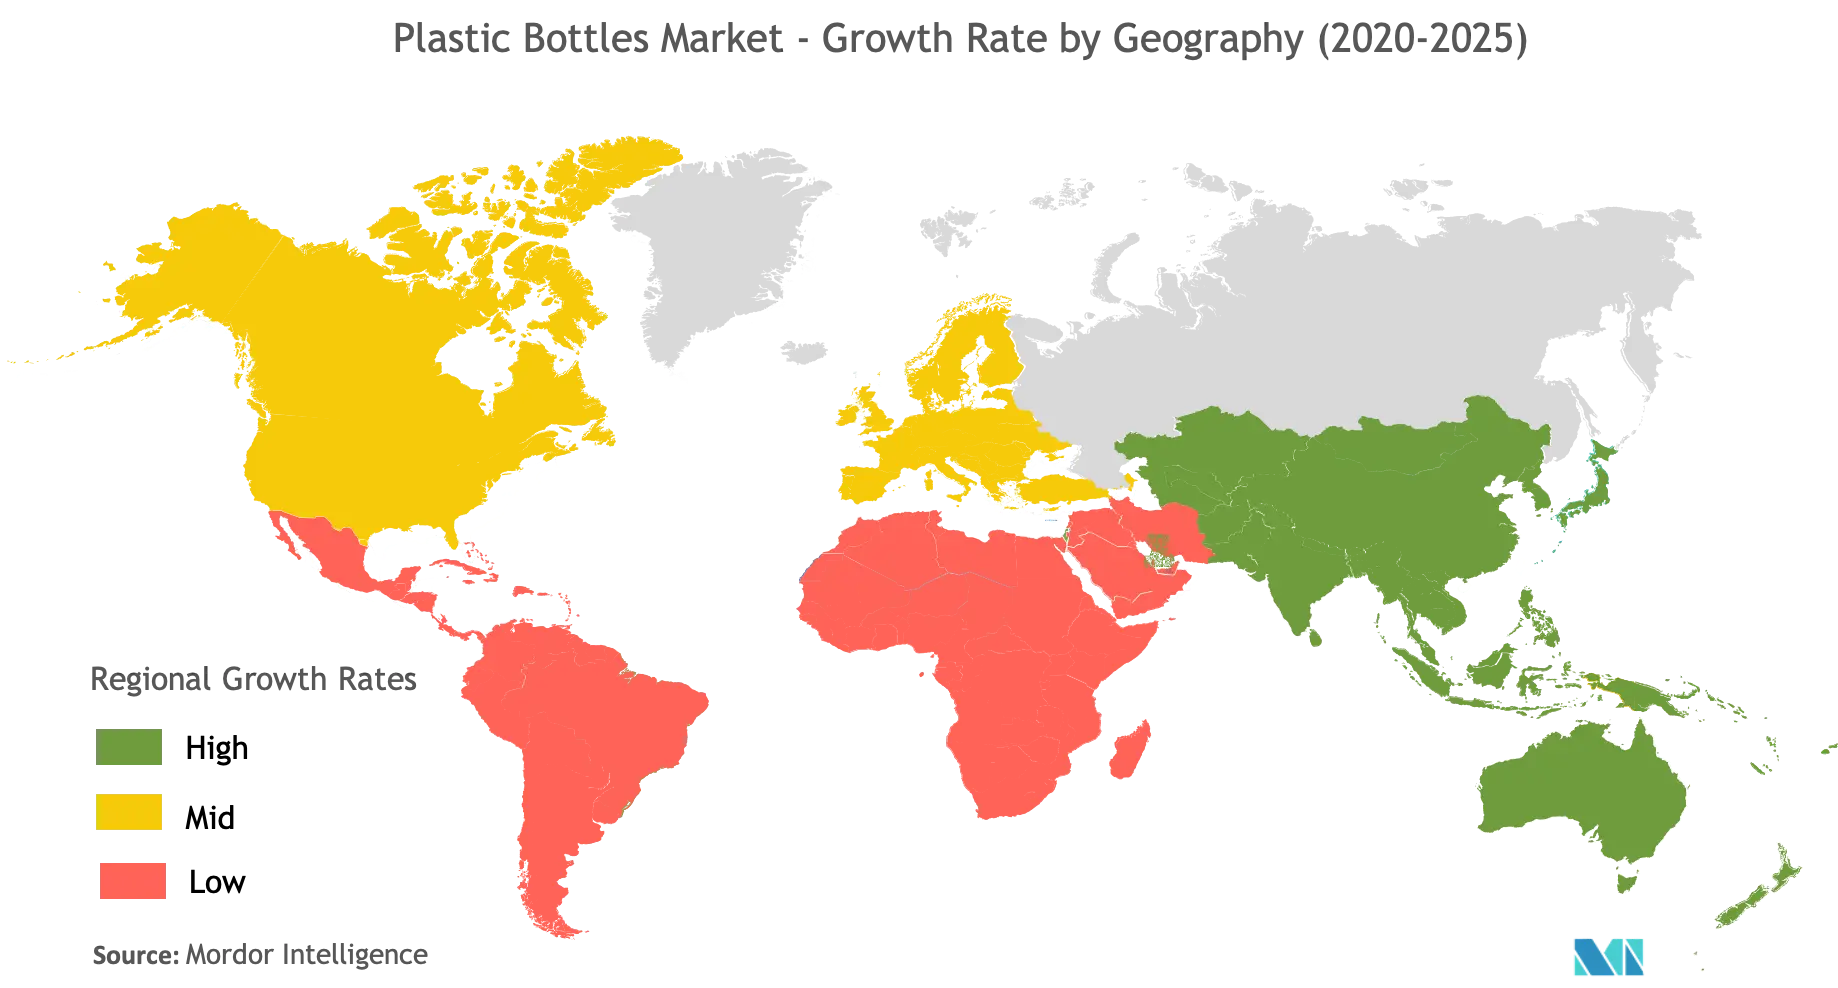 Plastic Bottles Market : Growth Rate by Geography (2020-2025)